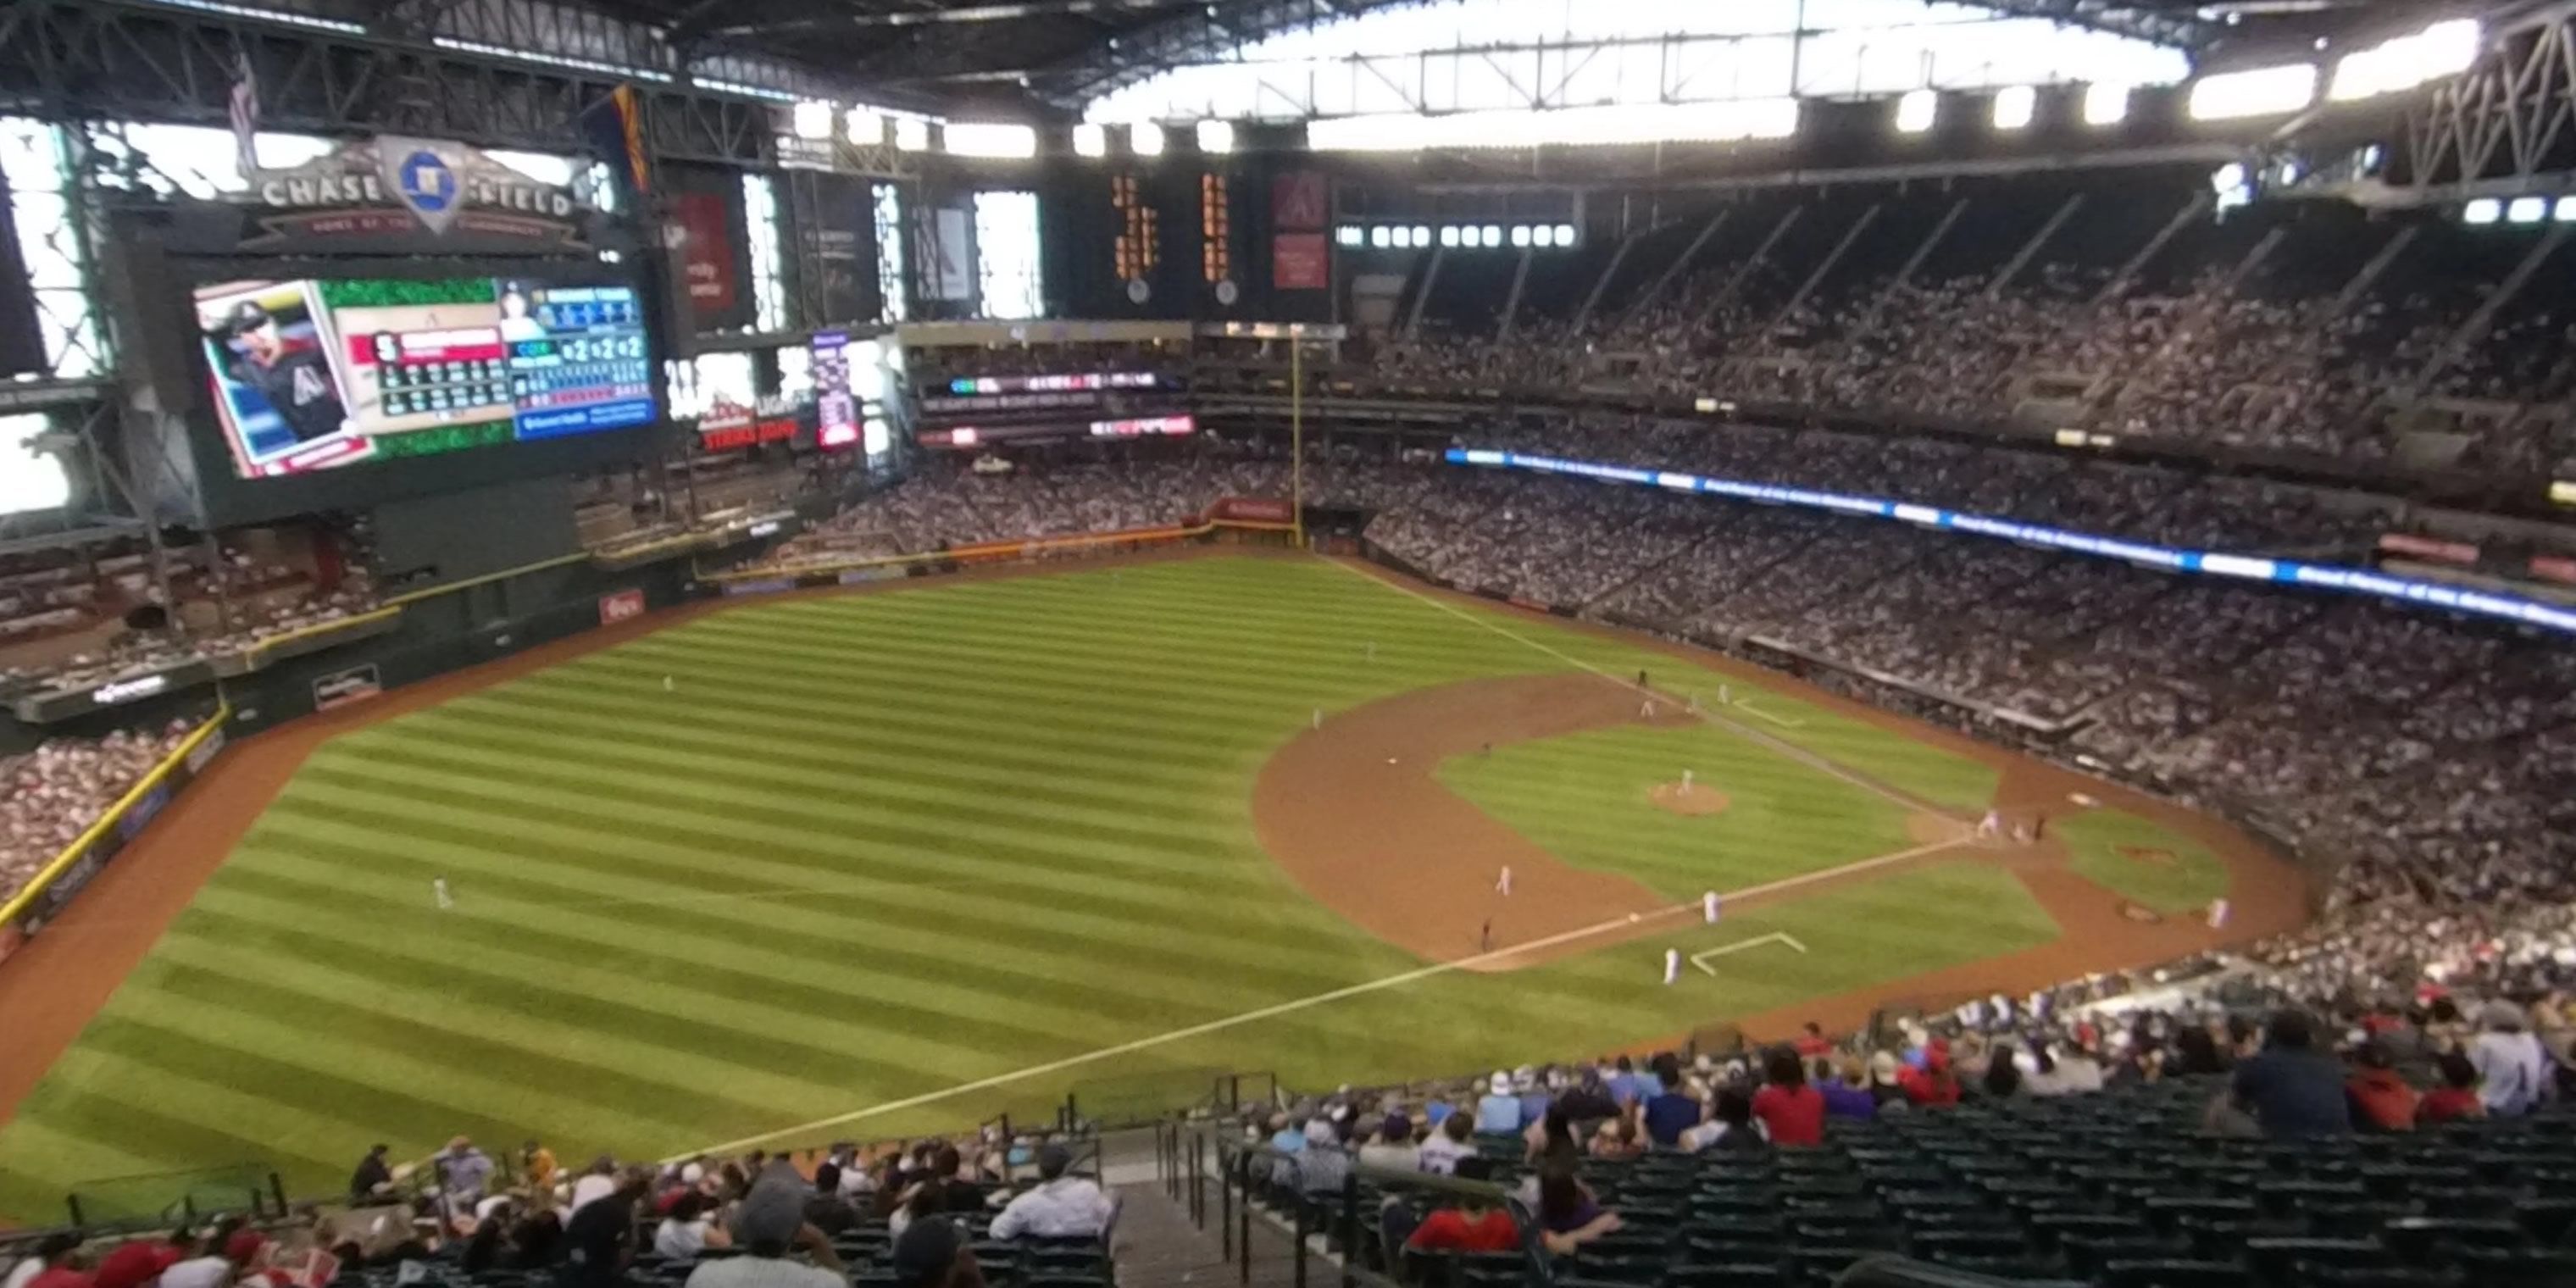 section 326 panoramic seat view  for baseball - chase field